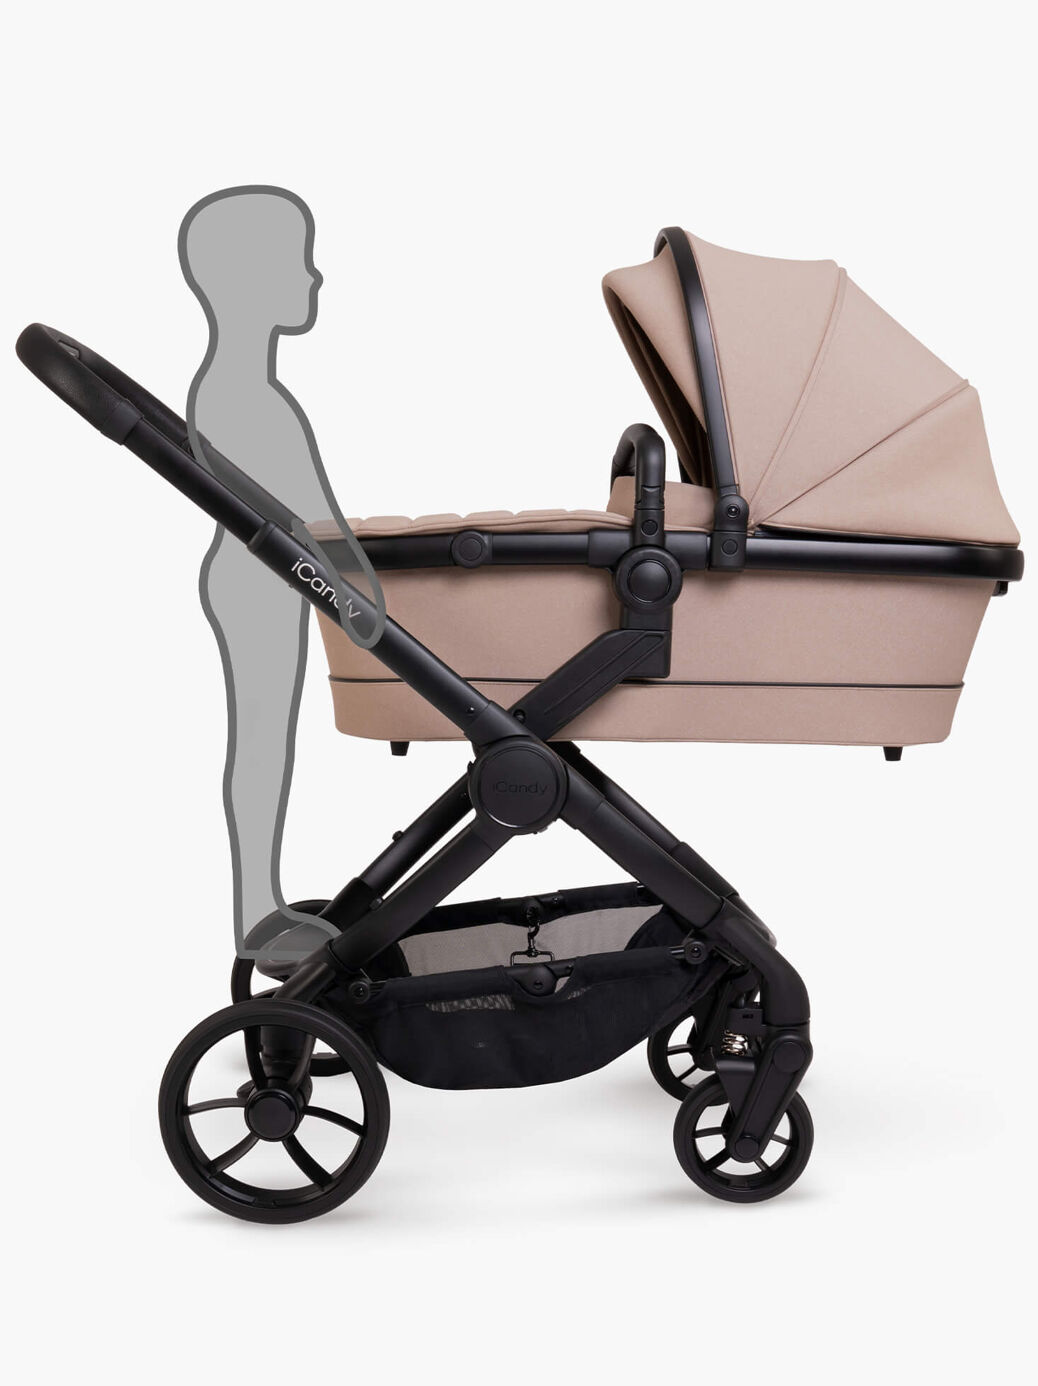 iCandy Peach 7 Pushchair and Carrycot - Cookie